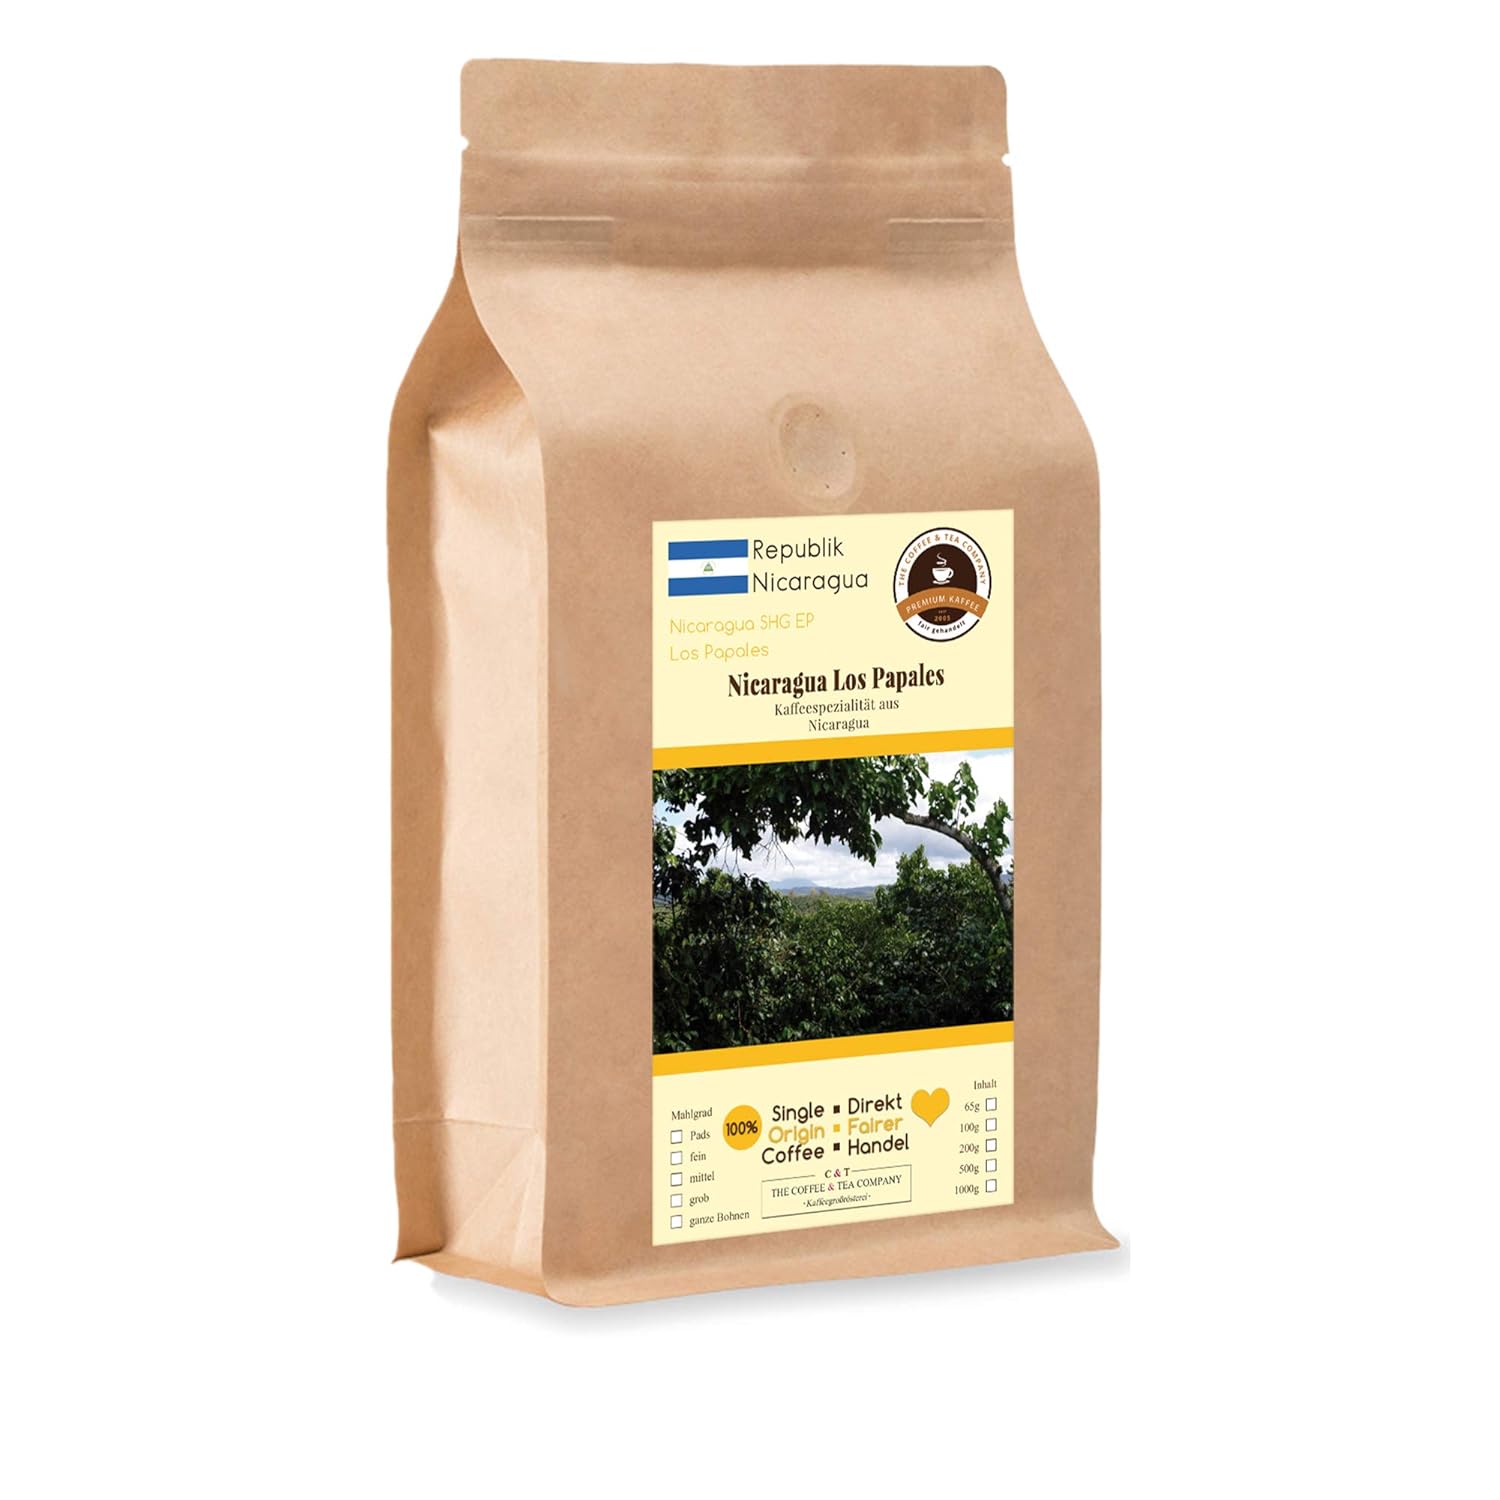 Coffee Globetrotter - Coffee with Heart - Nicaragua Los Papales - 500 g Very Fine Ground - for Portafilter Machine, Sieving Machine - Top Coffee Fair Trade Supports Social Projects